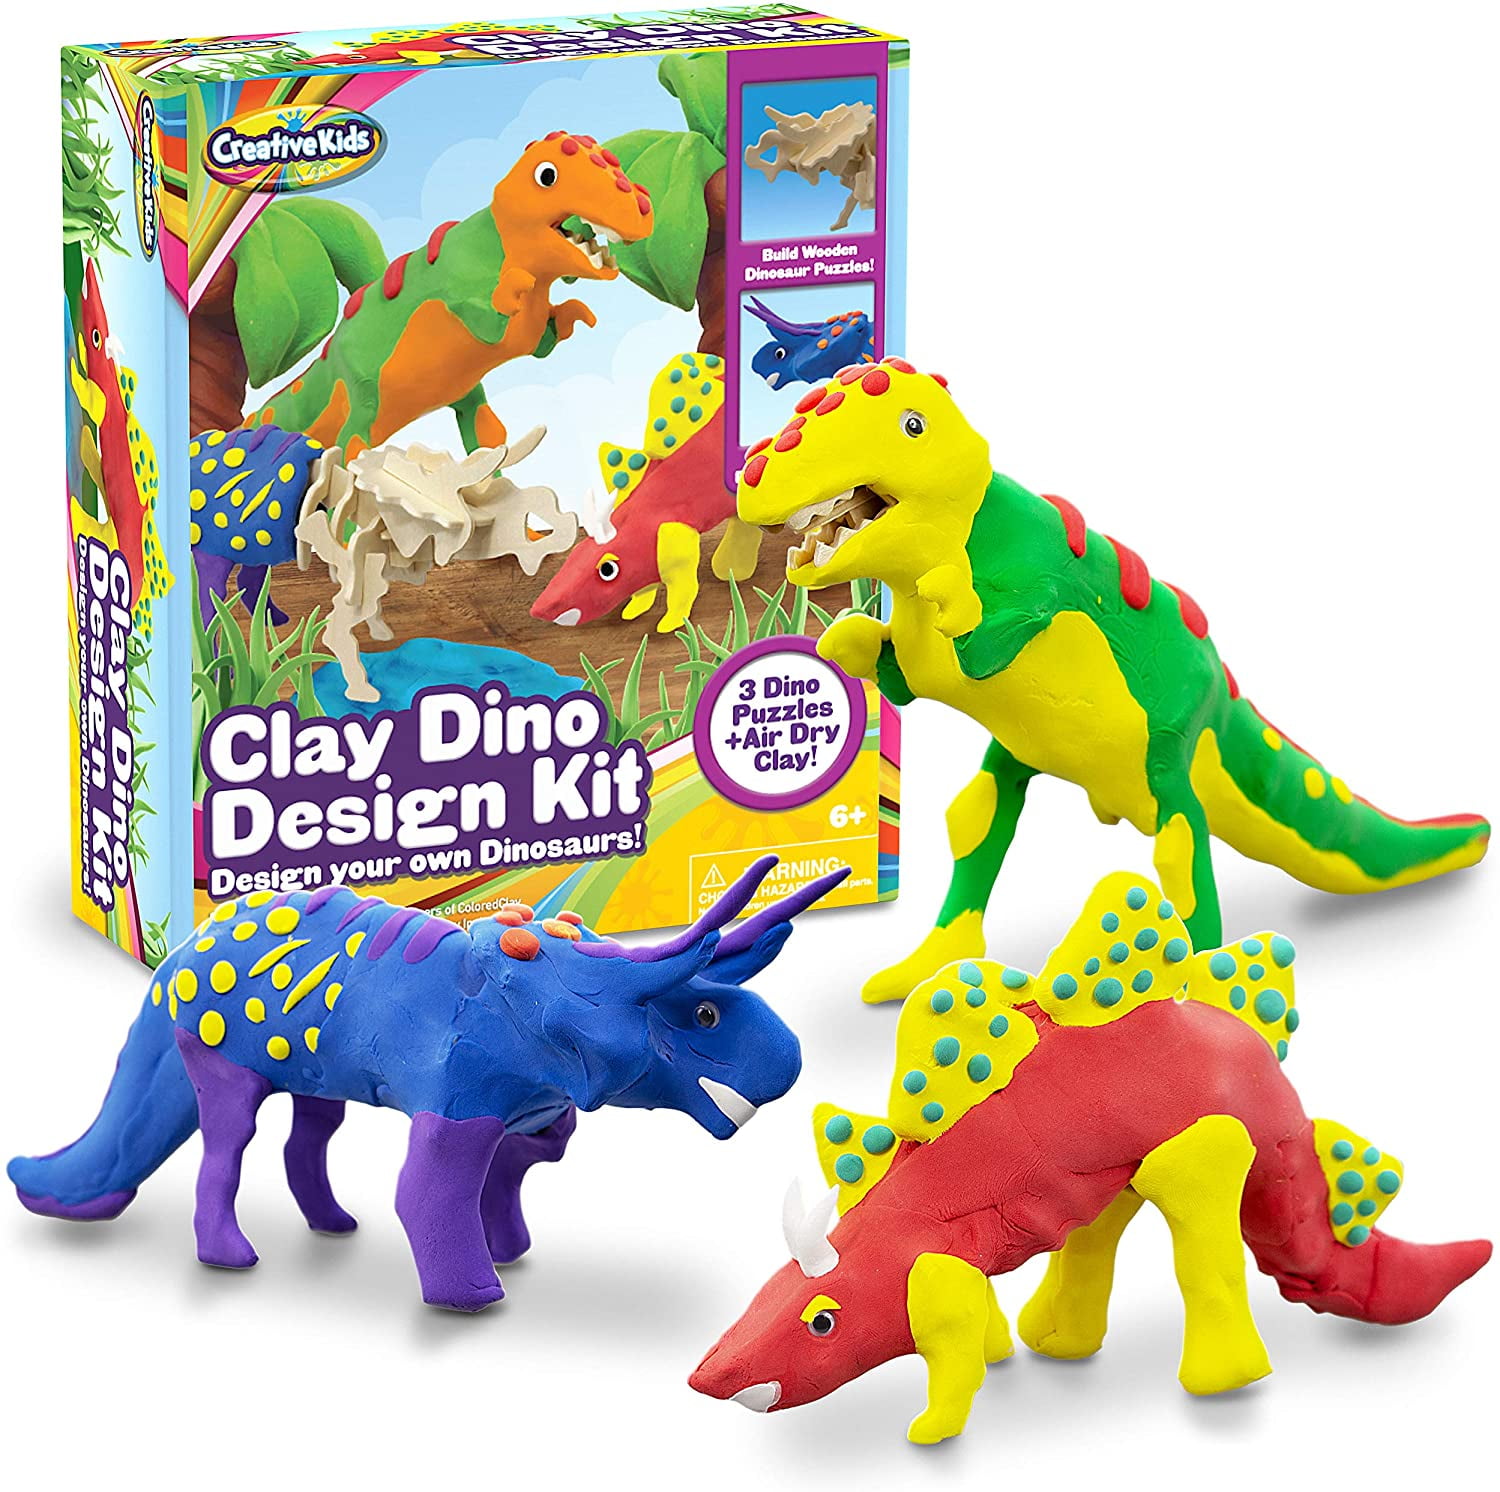 VOYAgers group Big Sale Super Soft Dough Rhino Modelling Clay Play Foam Modelling Art kit 3 in 1 Giraffe Dinosaur Craft Kits for Kids & Adults 